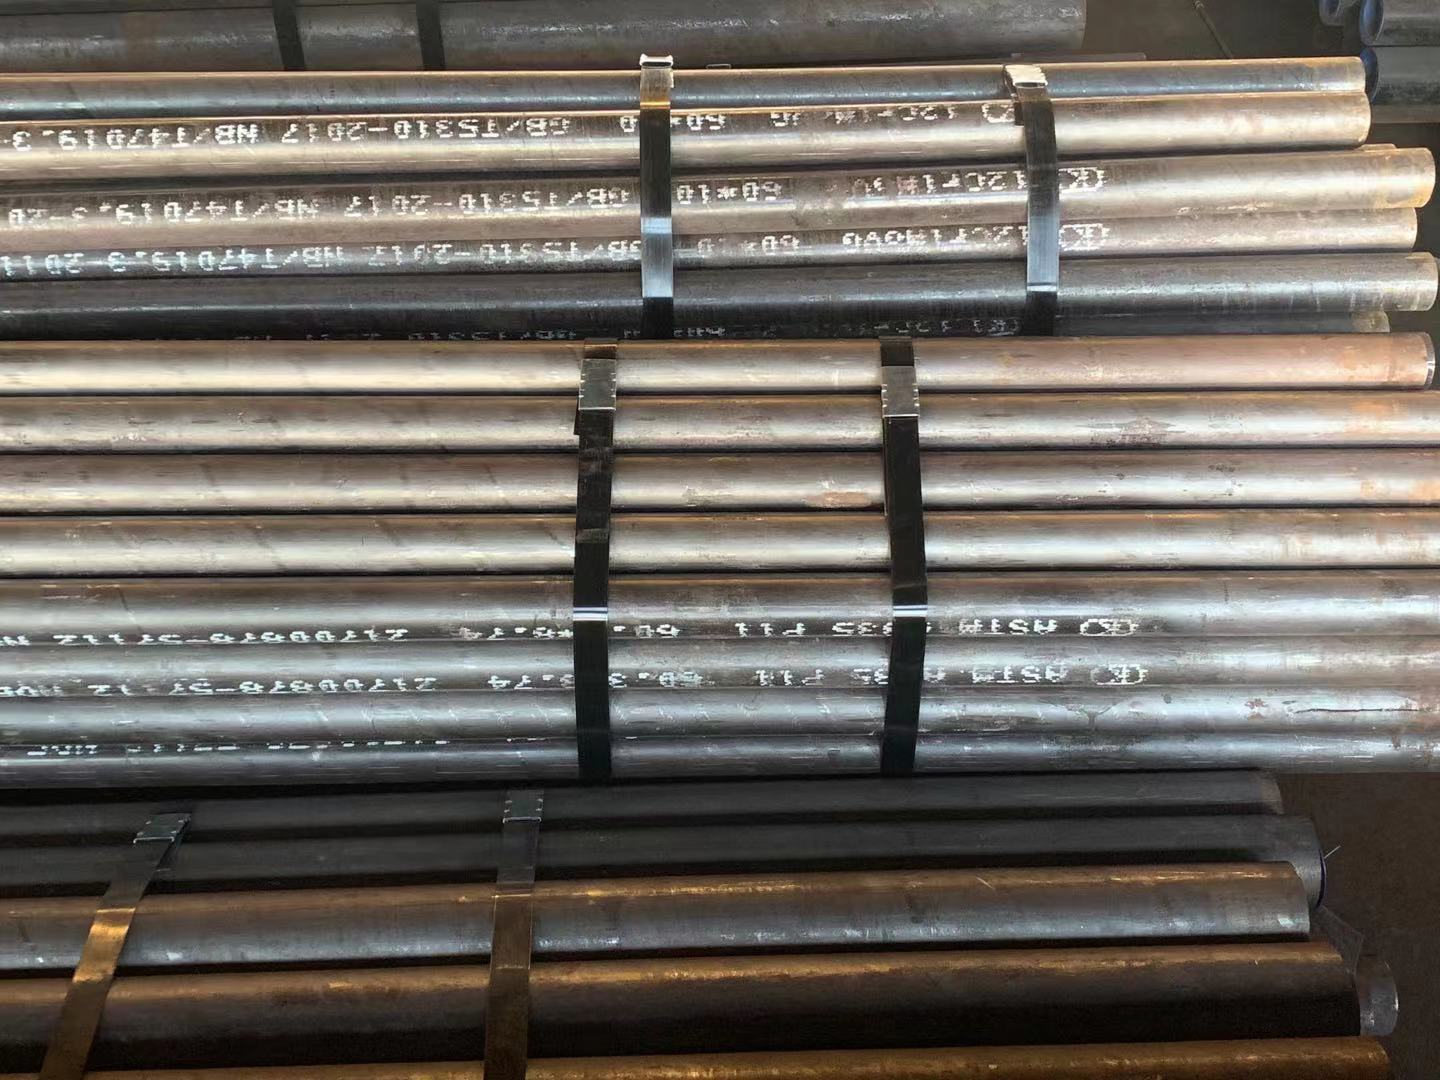 Manufacturer of Corrugated Stainless Steel Tube -  ASTM A335 P12 Alloy Steel Pipe manufacturer and suppliers – Cepheus